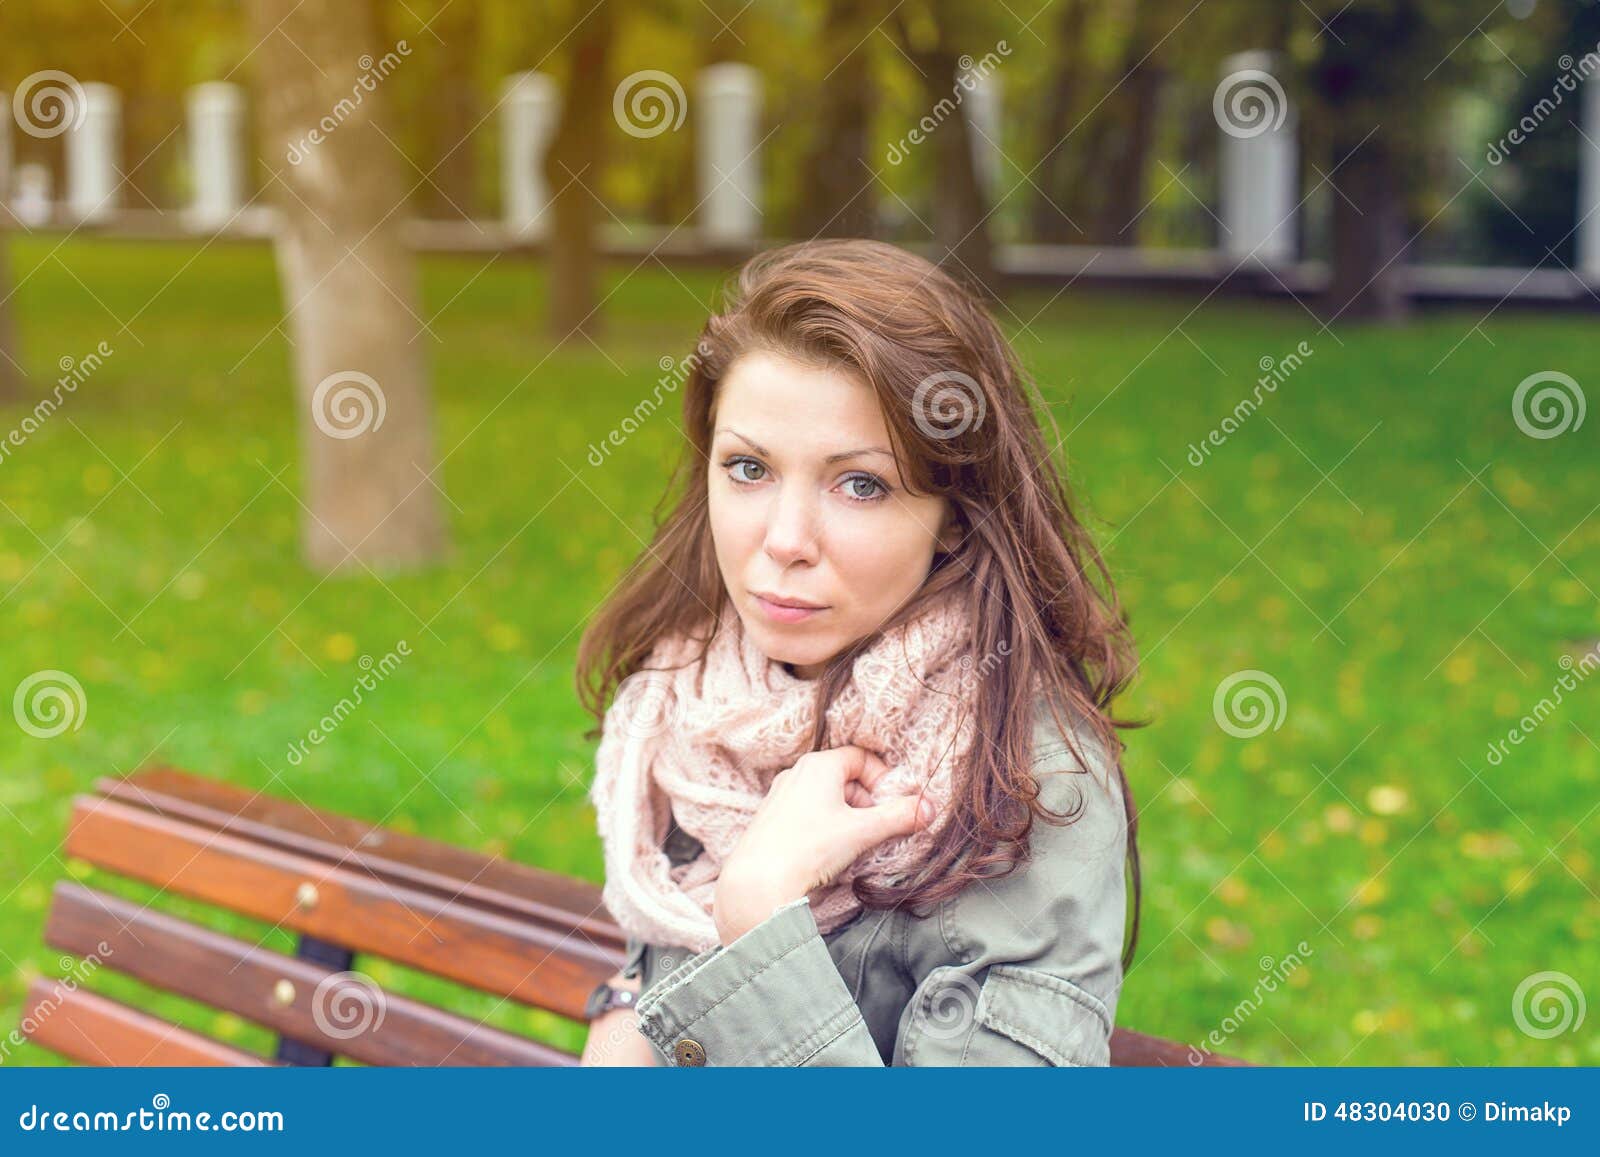 Woman Sitting Bench Outside Stock Photo - Image of happy, girl: 48304030